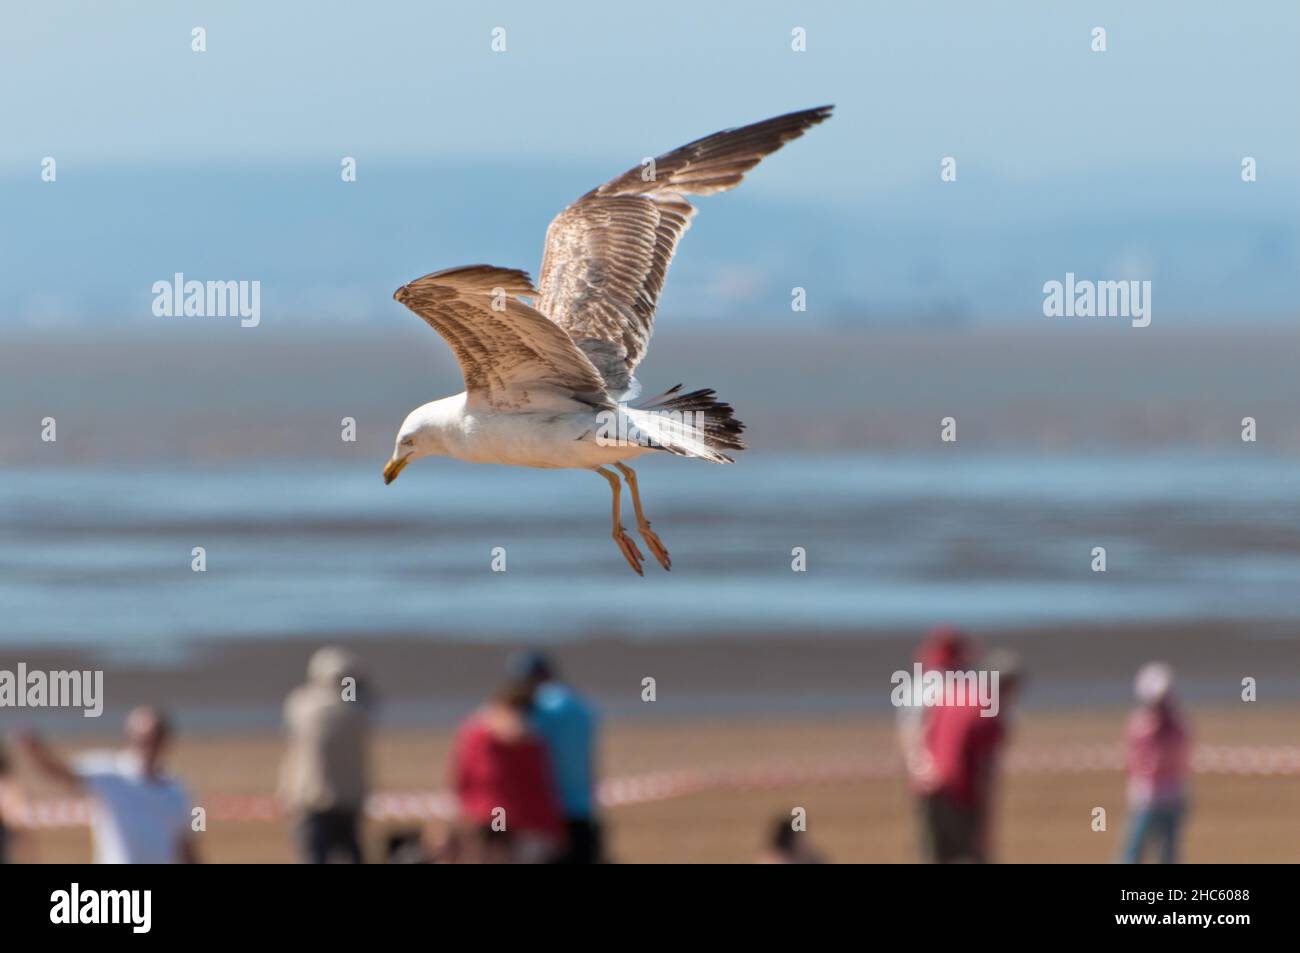 A gull hovering in the wind at a beach with people in the background. Stock Photo